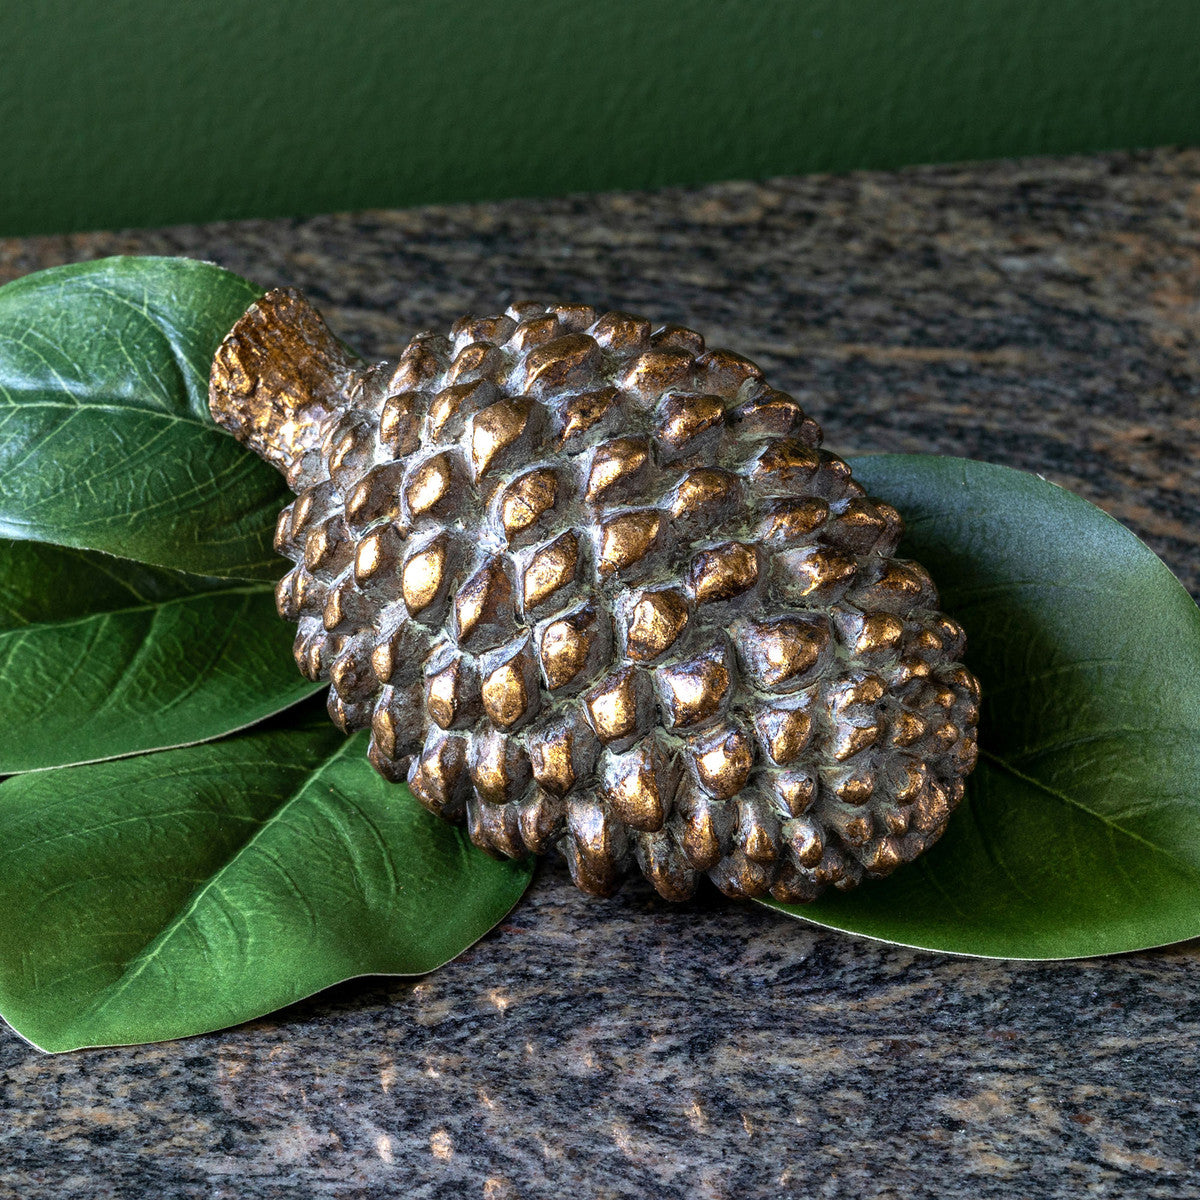 Our Bronze Pinecone is an ornate and sturdy statement piece that will add a touch of elegance to any room. Crafted from heavy duty bronze, these beautiful decorative pinecones will look stunning on a tabletop or shelf. A timeless classic, this item will never go out of style.